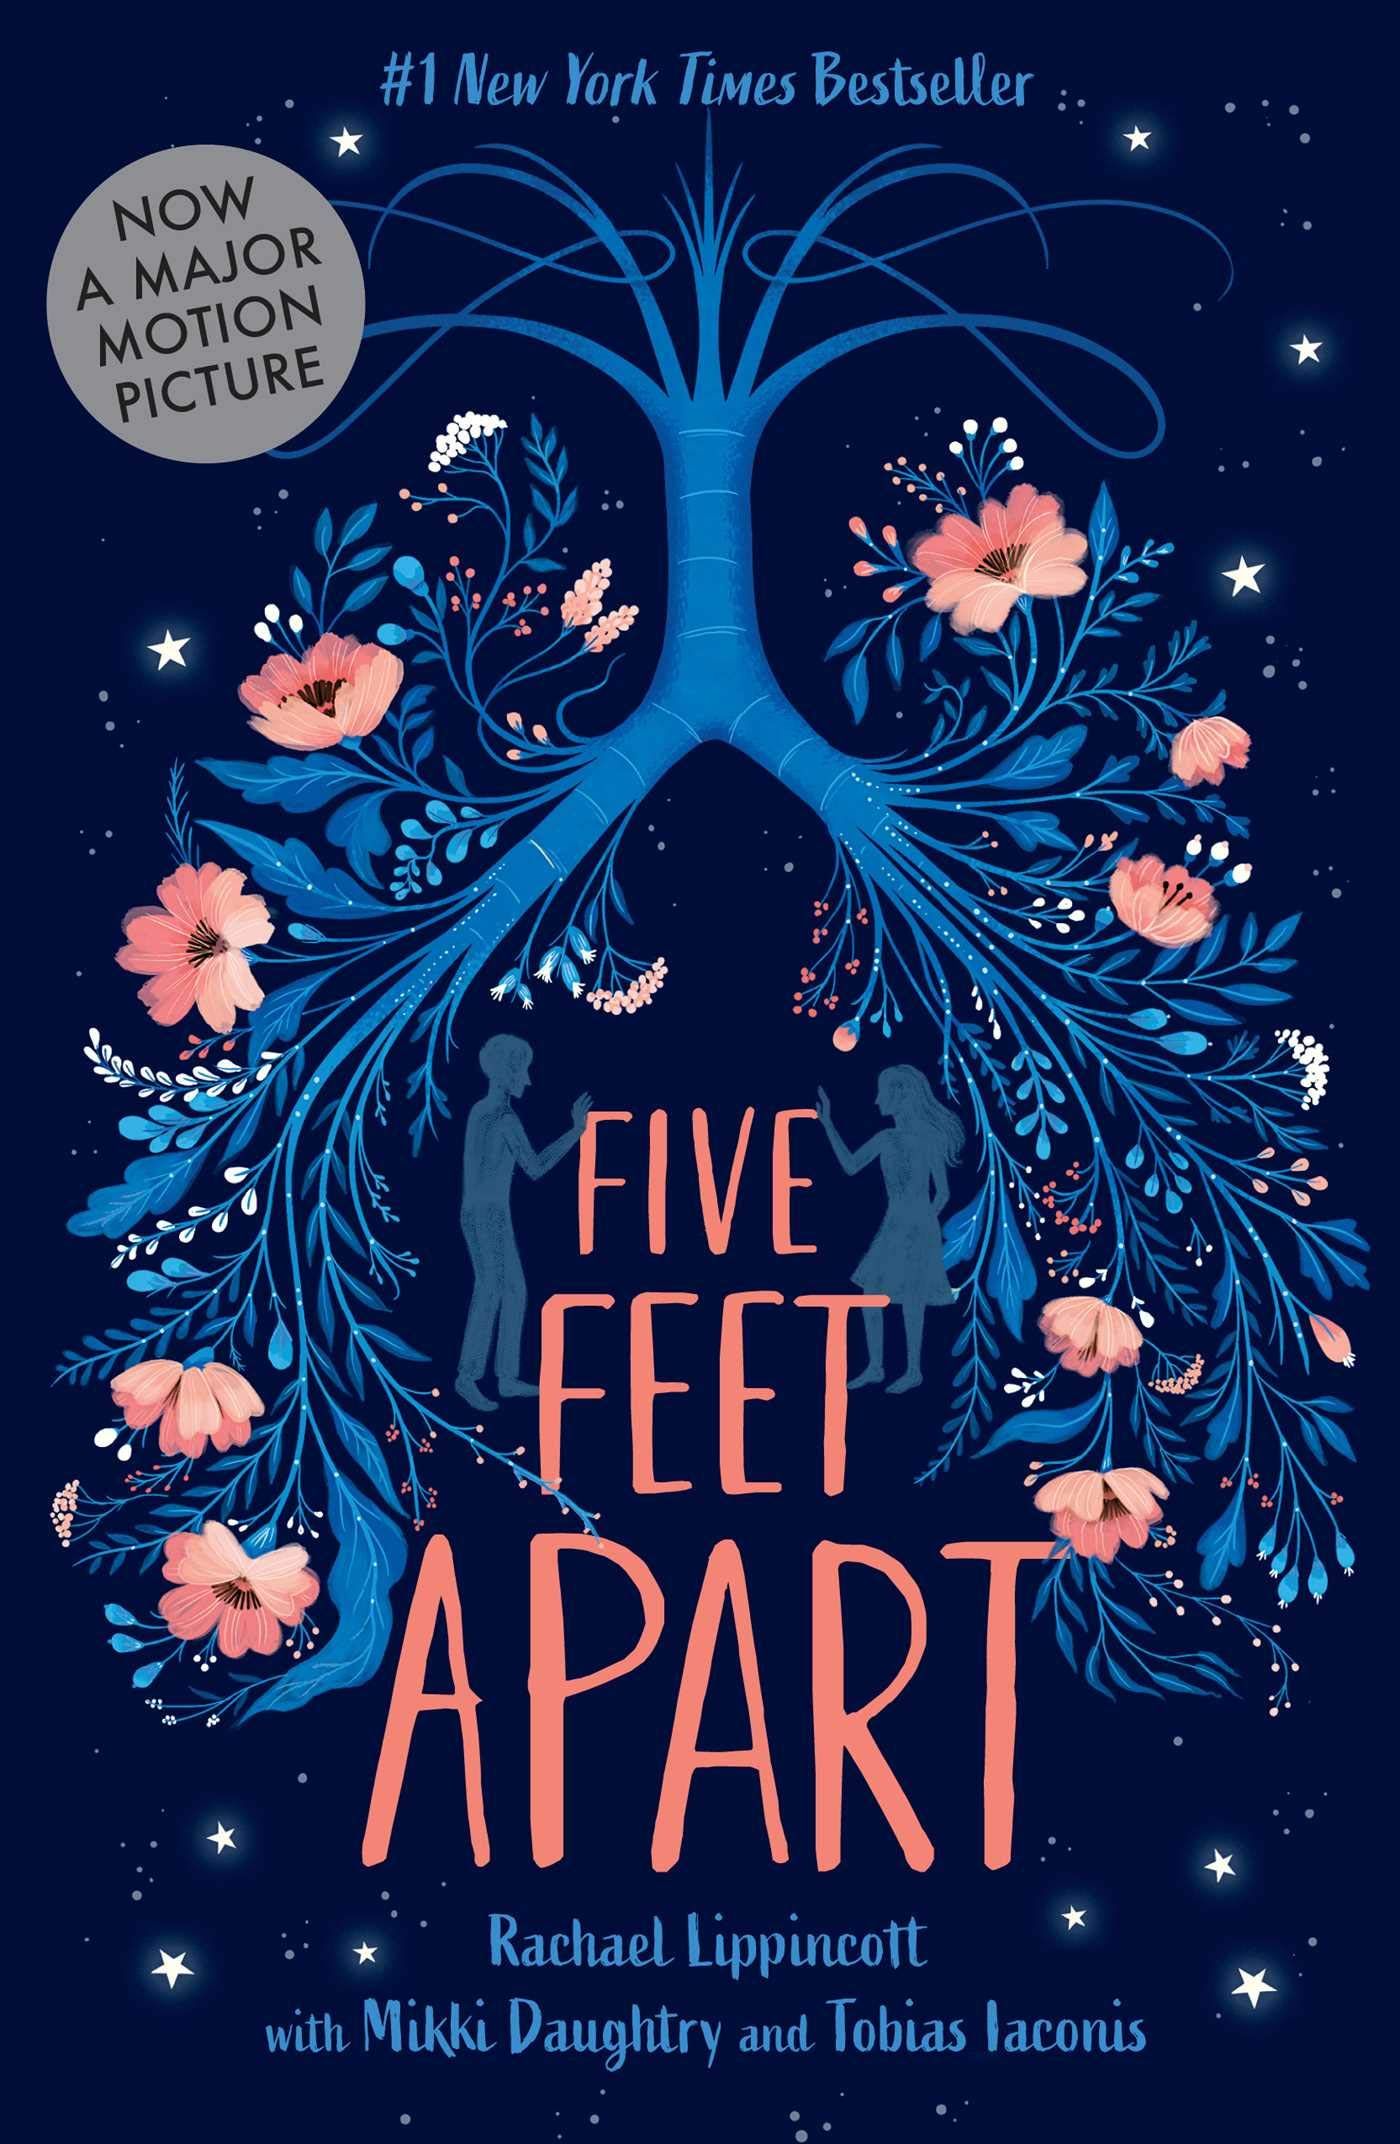 Buy Five Feet Apart Book Online at Low Prices in India. Five Feet Apart Reviews & Ratings